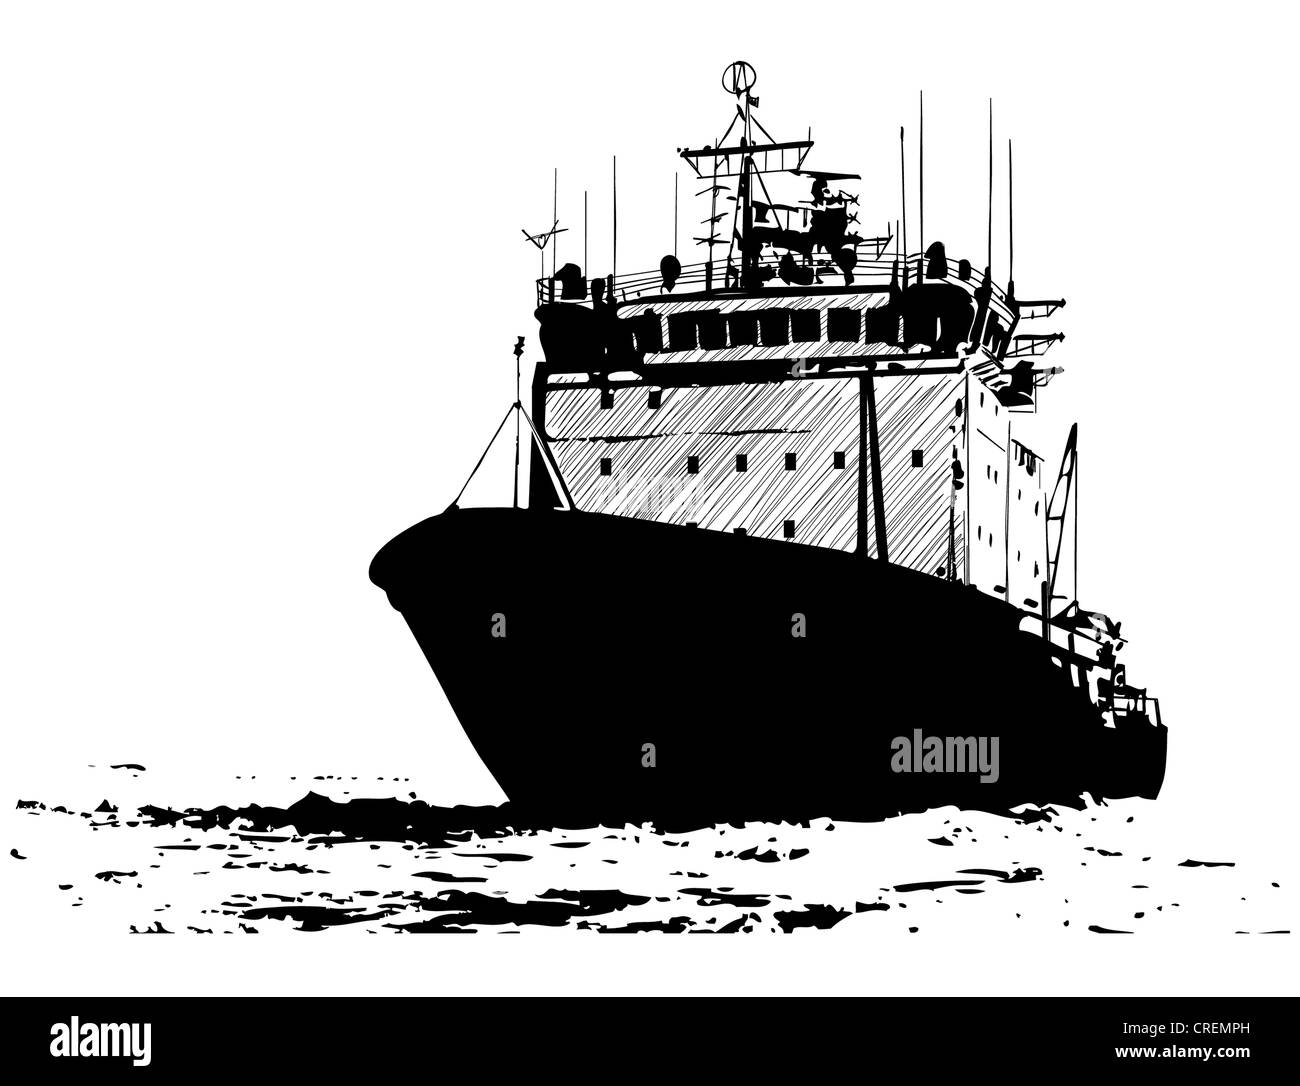 The sketch of a ship Stock Photo